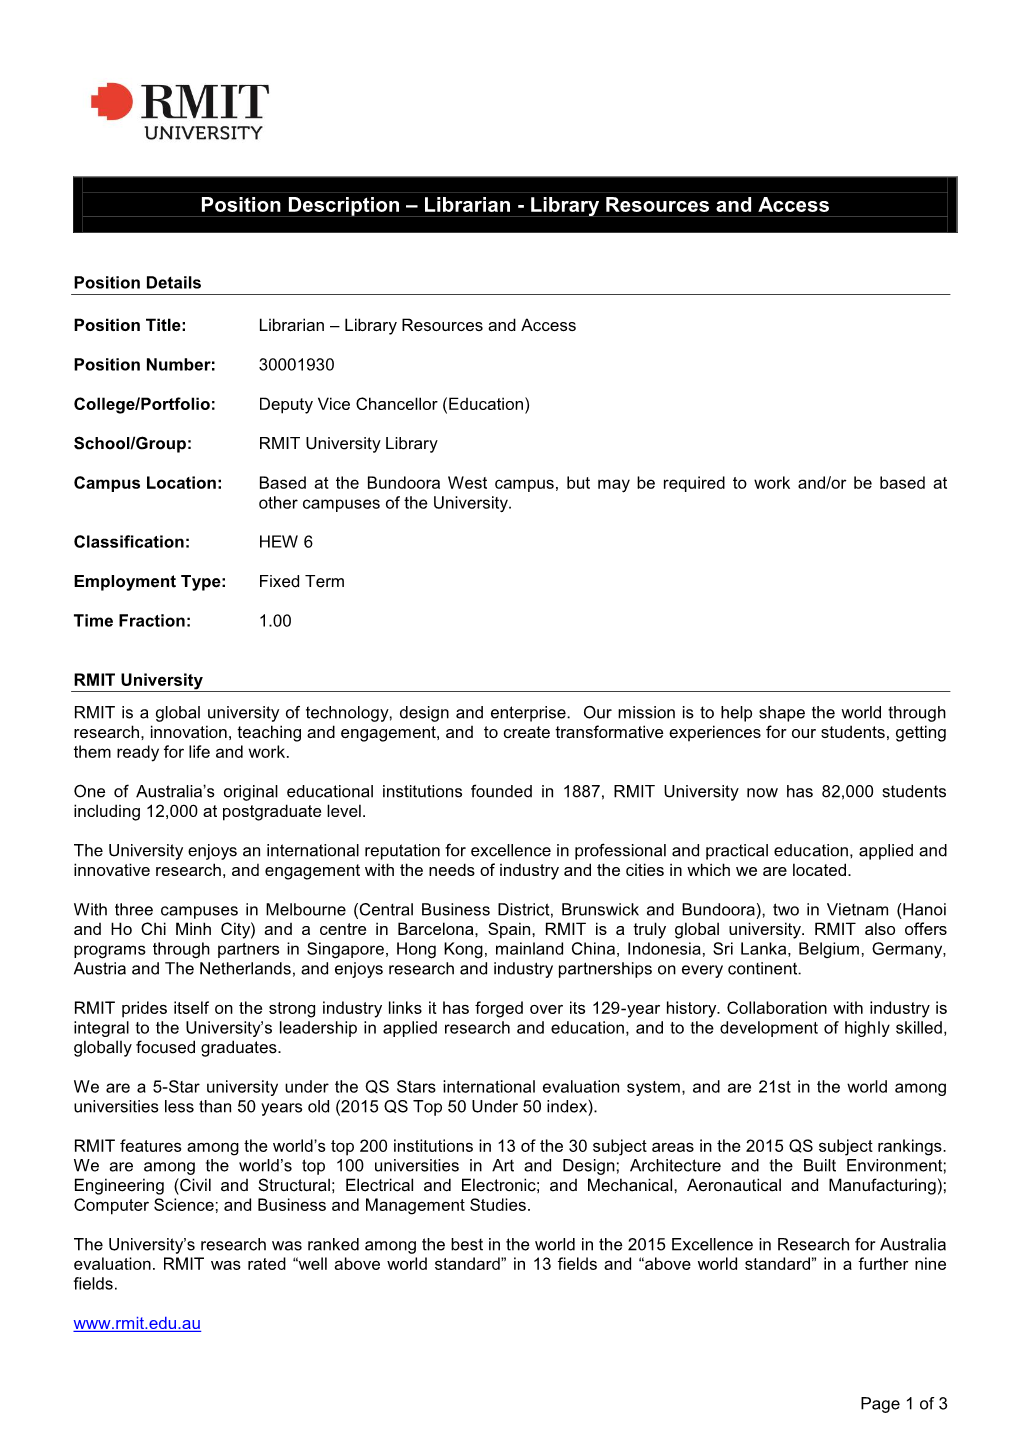 Position Title: Librarian – Library Resources and Access